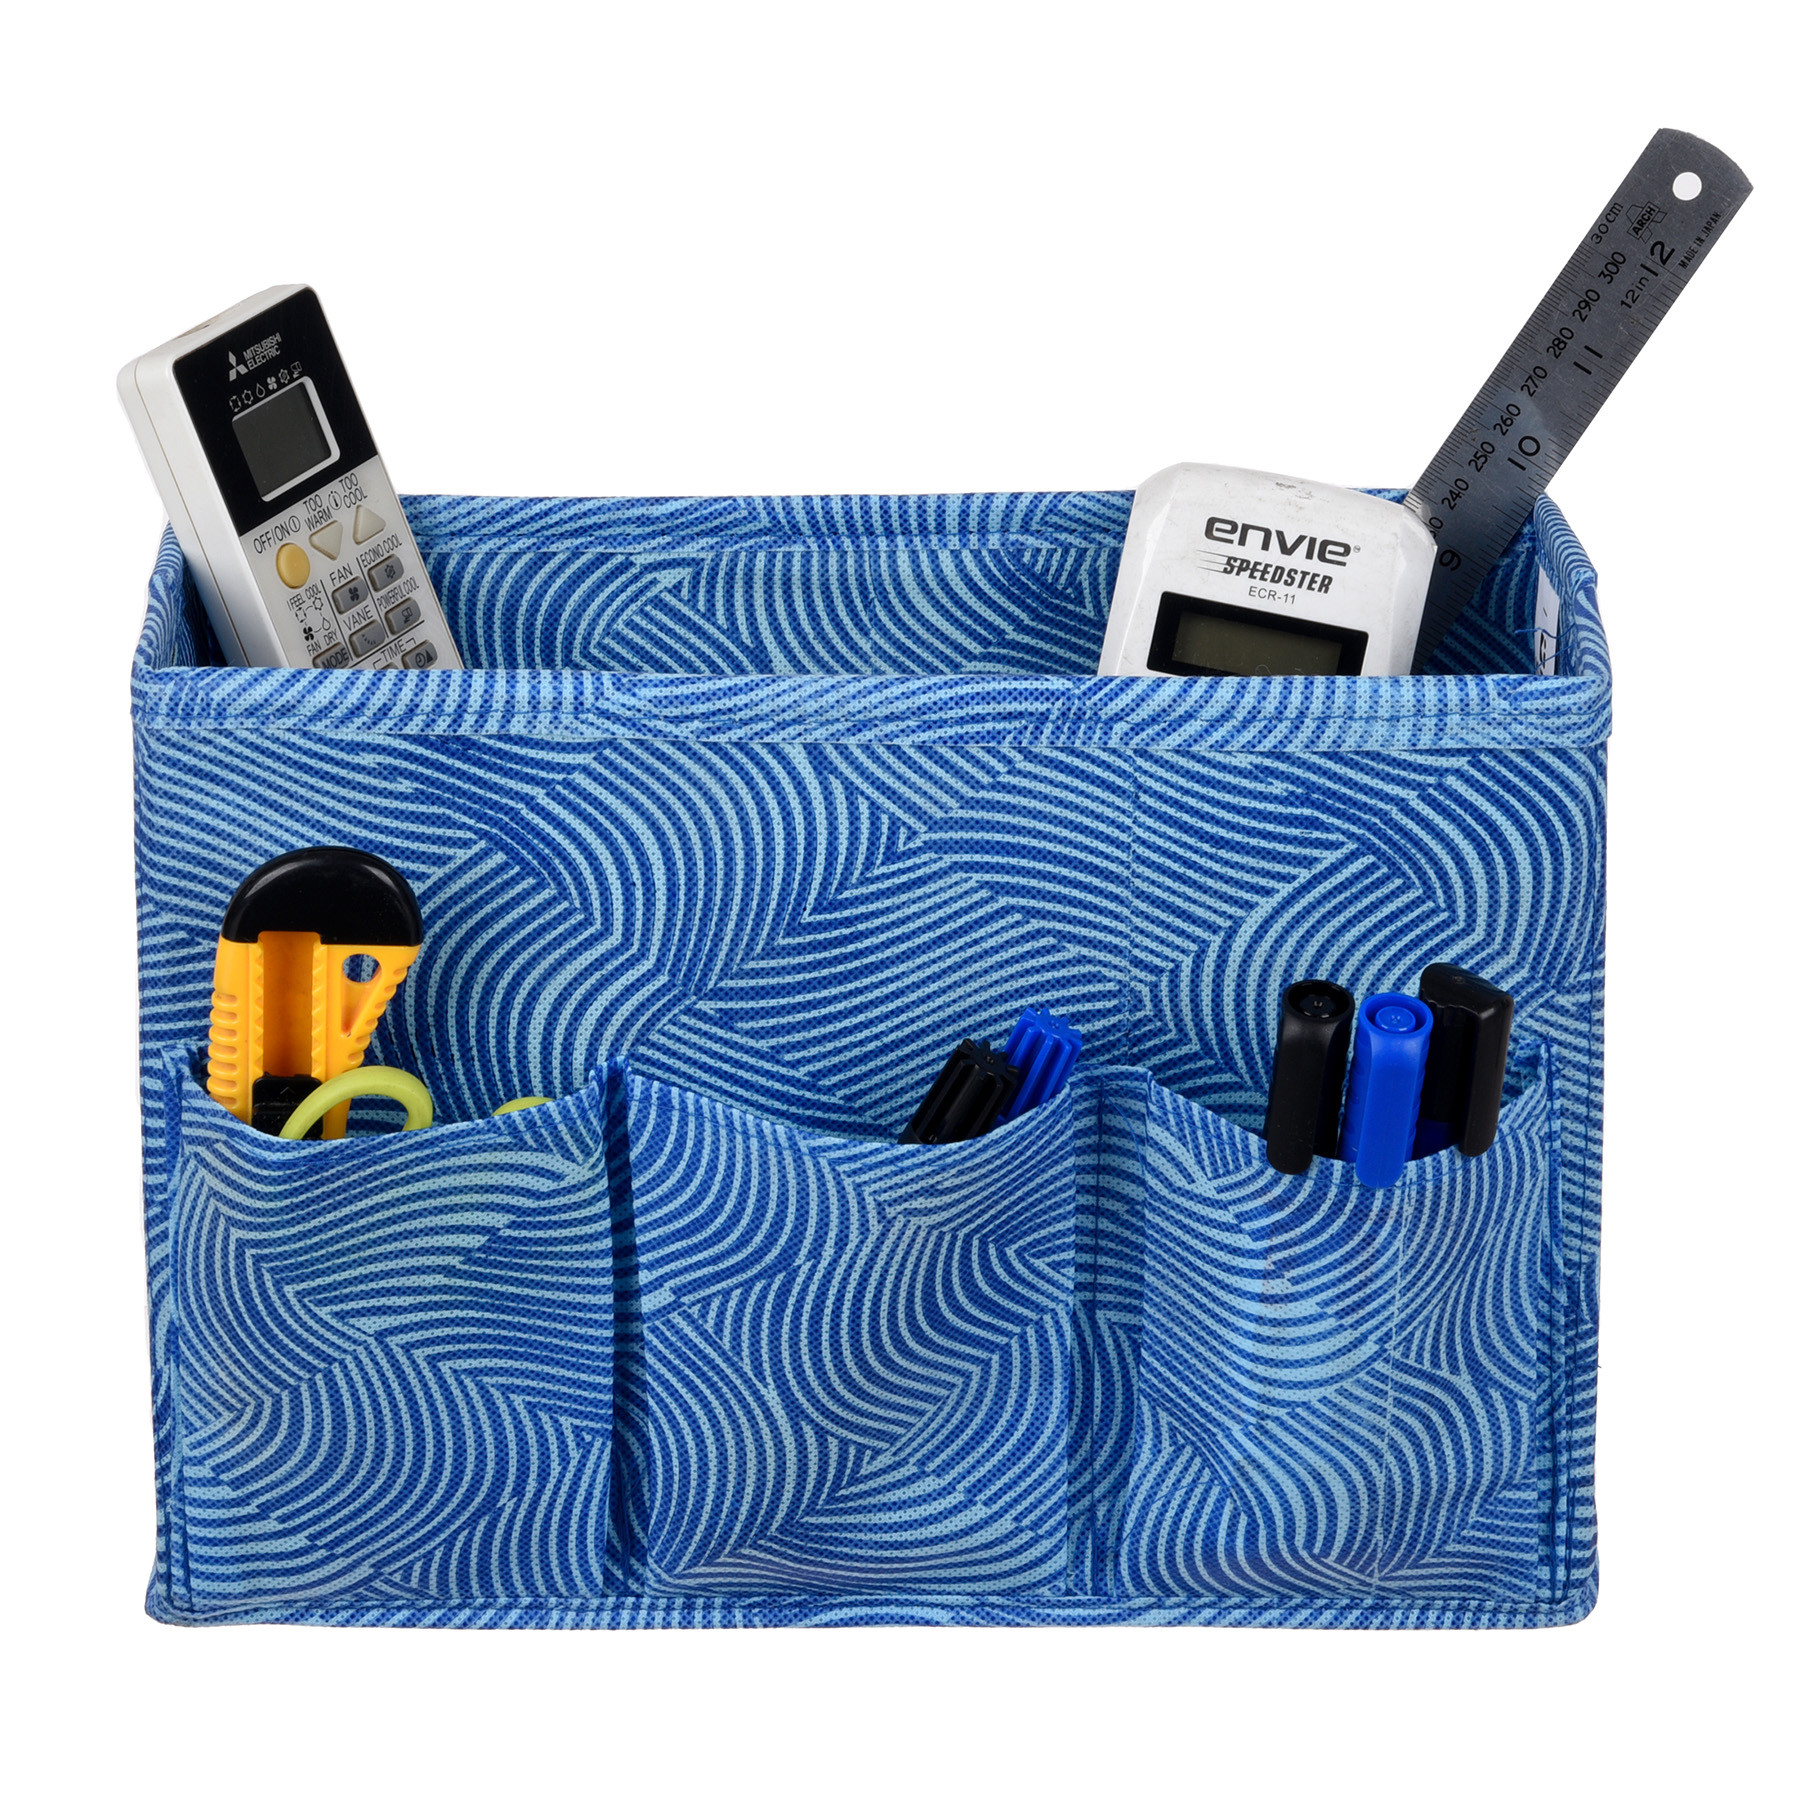 Kuber Industries Stationary Box | Non-Woven Files Organizer for Office | Desk Organizer | Stationary Organizer for Kids Room with 3 Compartment | Zig Zag Storage Box | Small | Blue